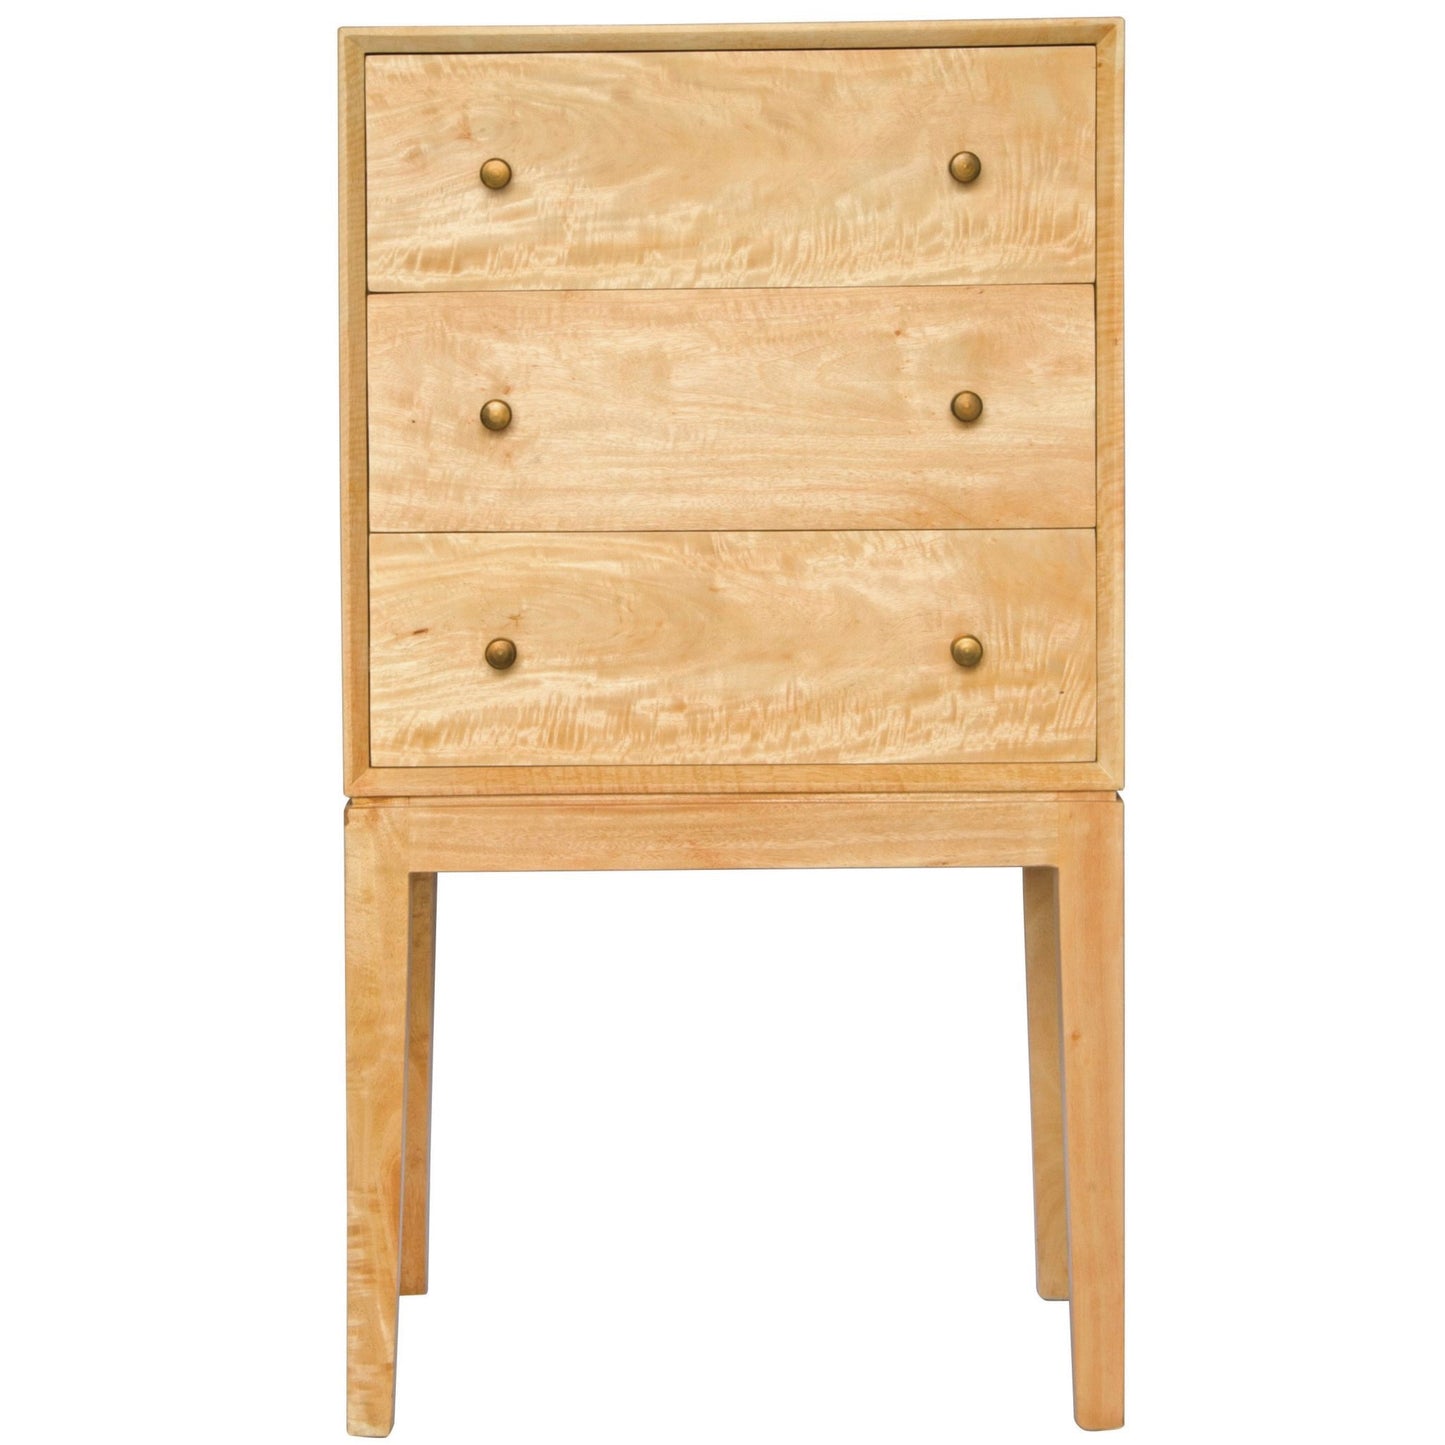 Hailey Tall drawers